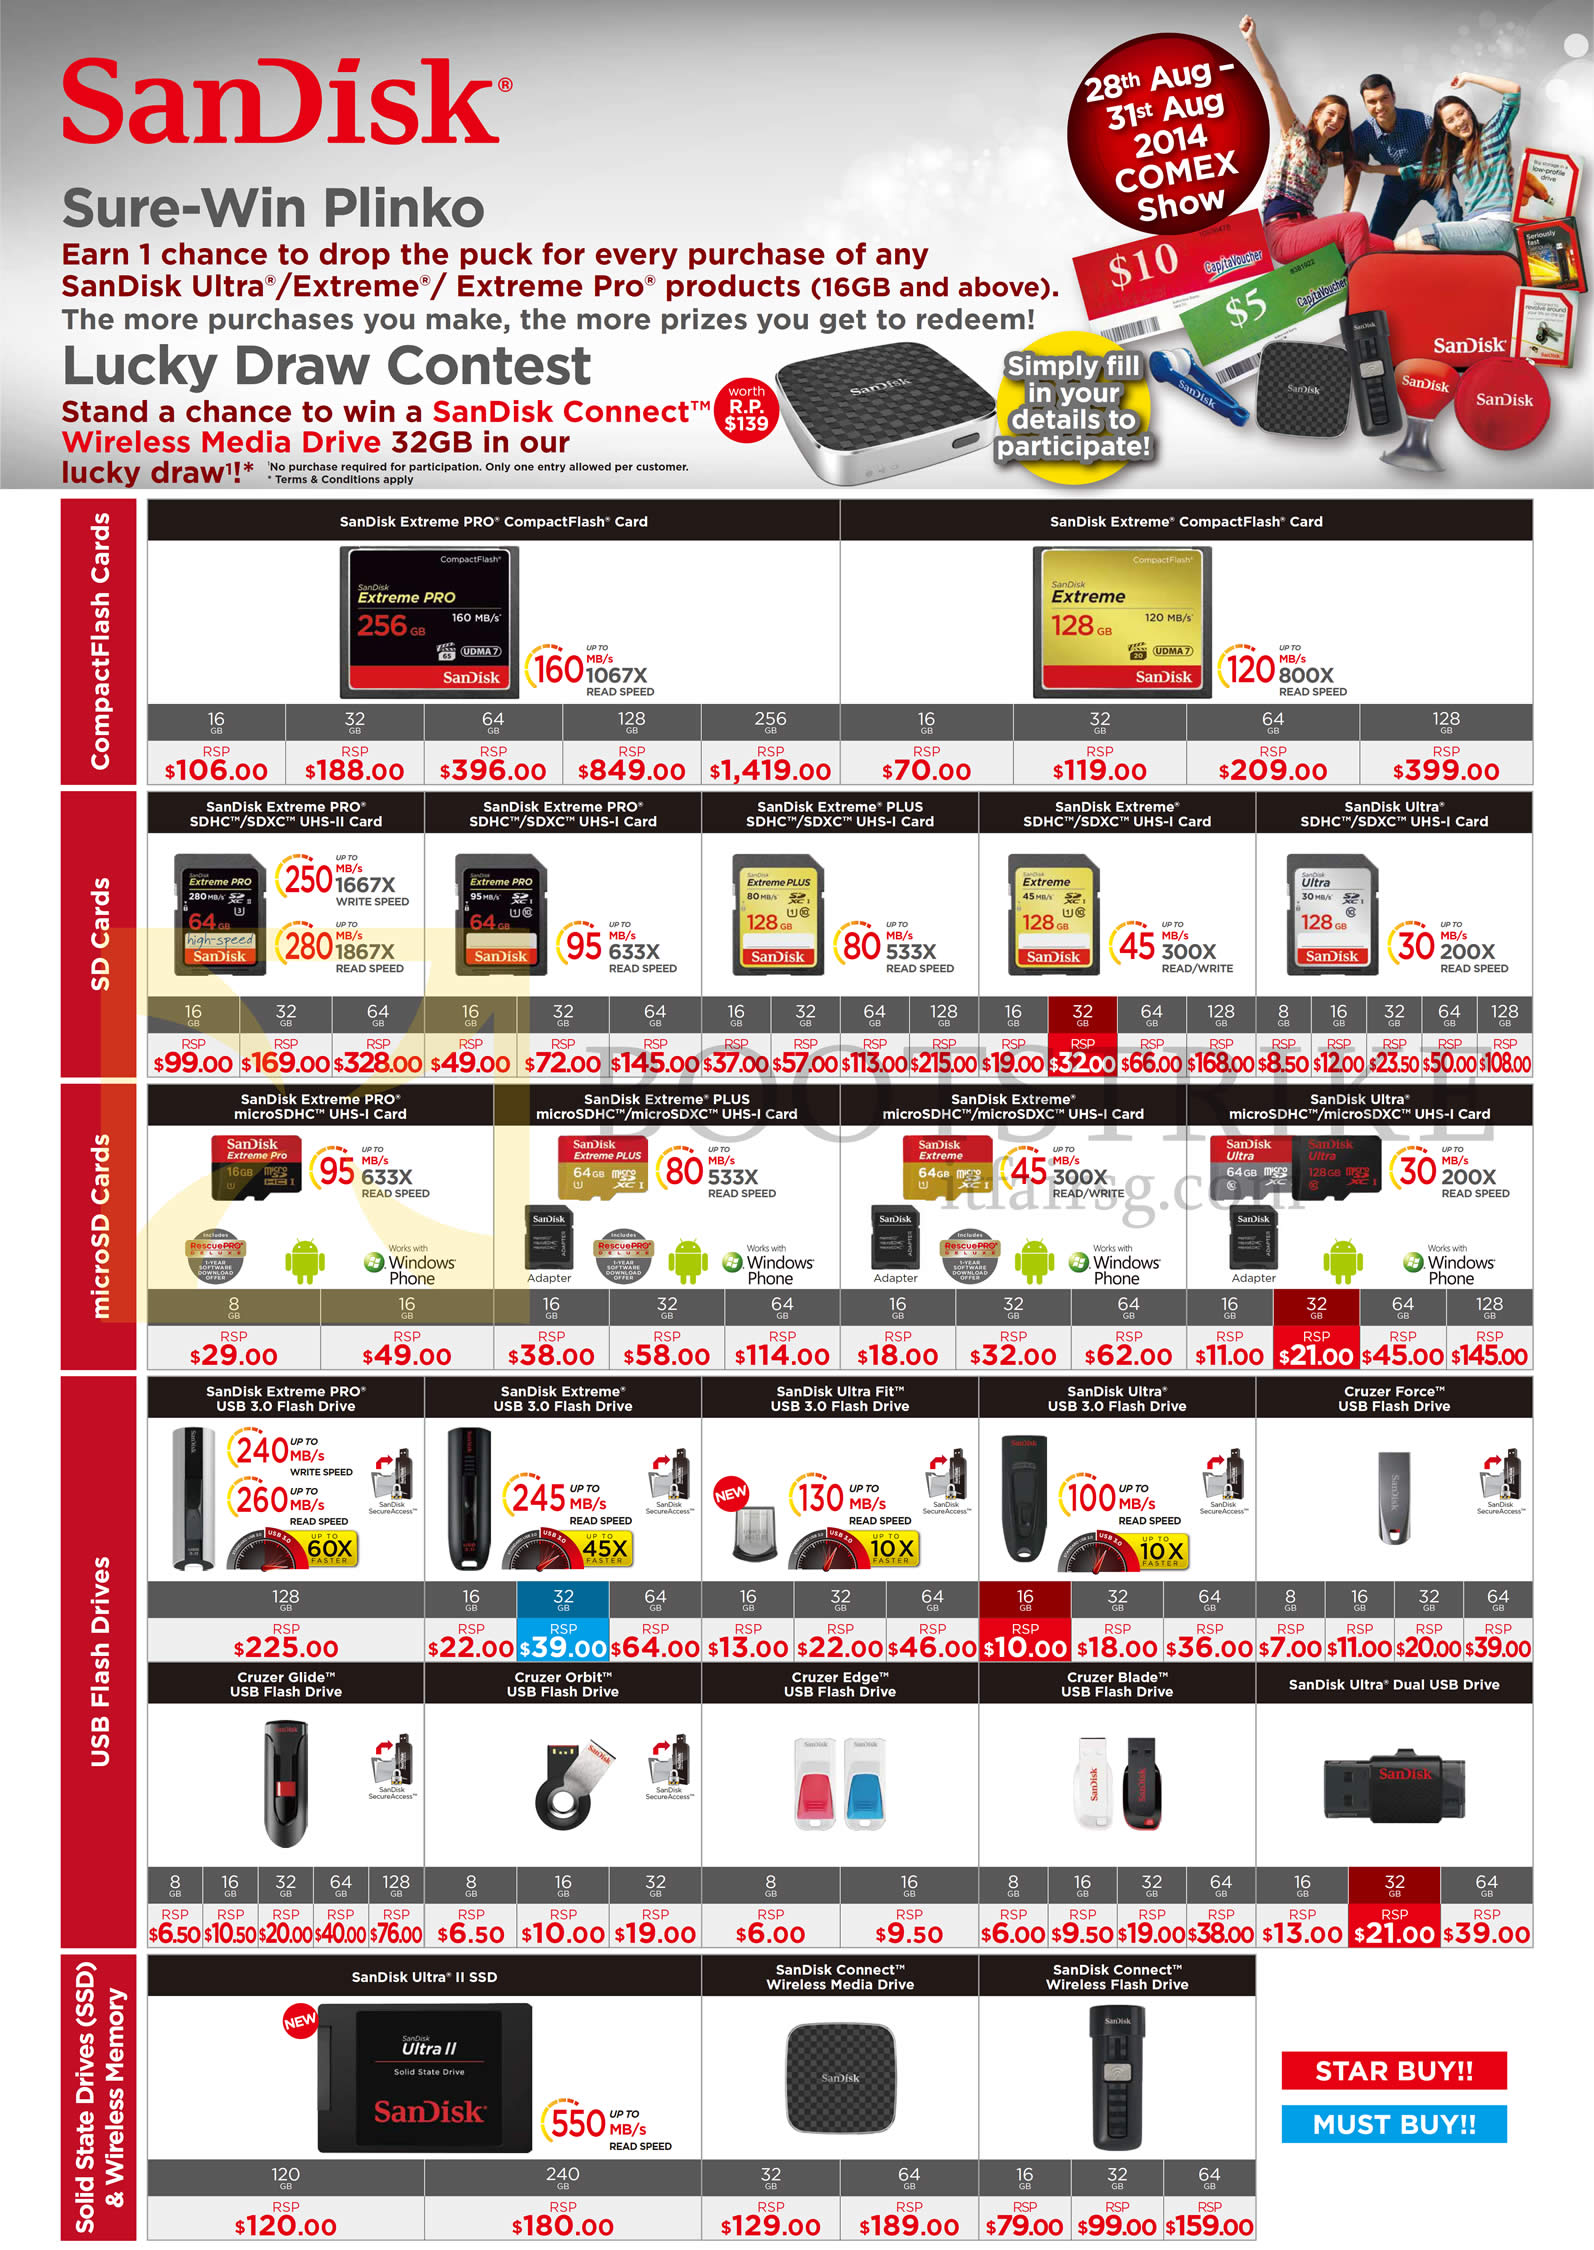 COMEX 2014 price list image brochure of Sandisk Memory Cards (RSP Prices) Flash USB, Compact Flash Cards CF, SD Cards, MicroSD Cards, Drives, SSDs, Wireless Memory